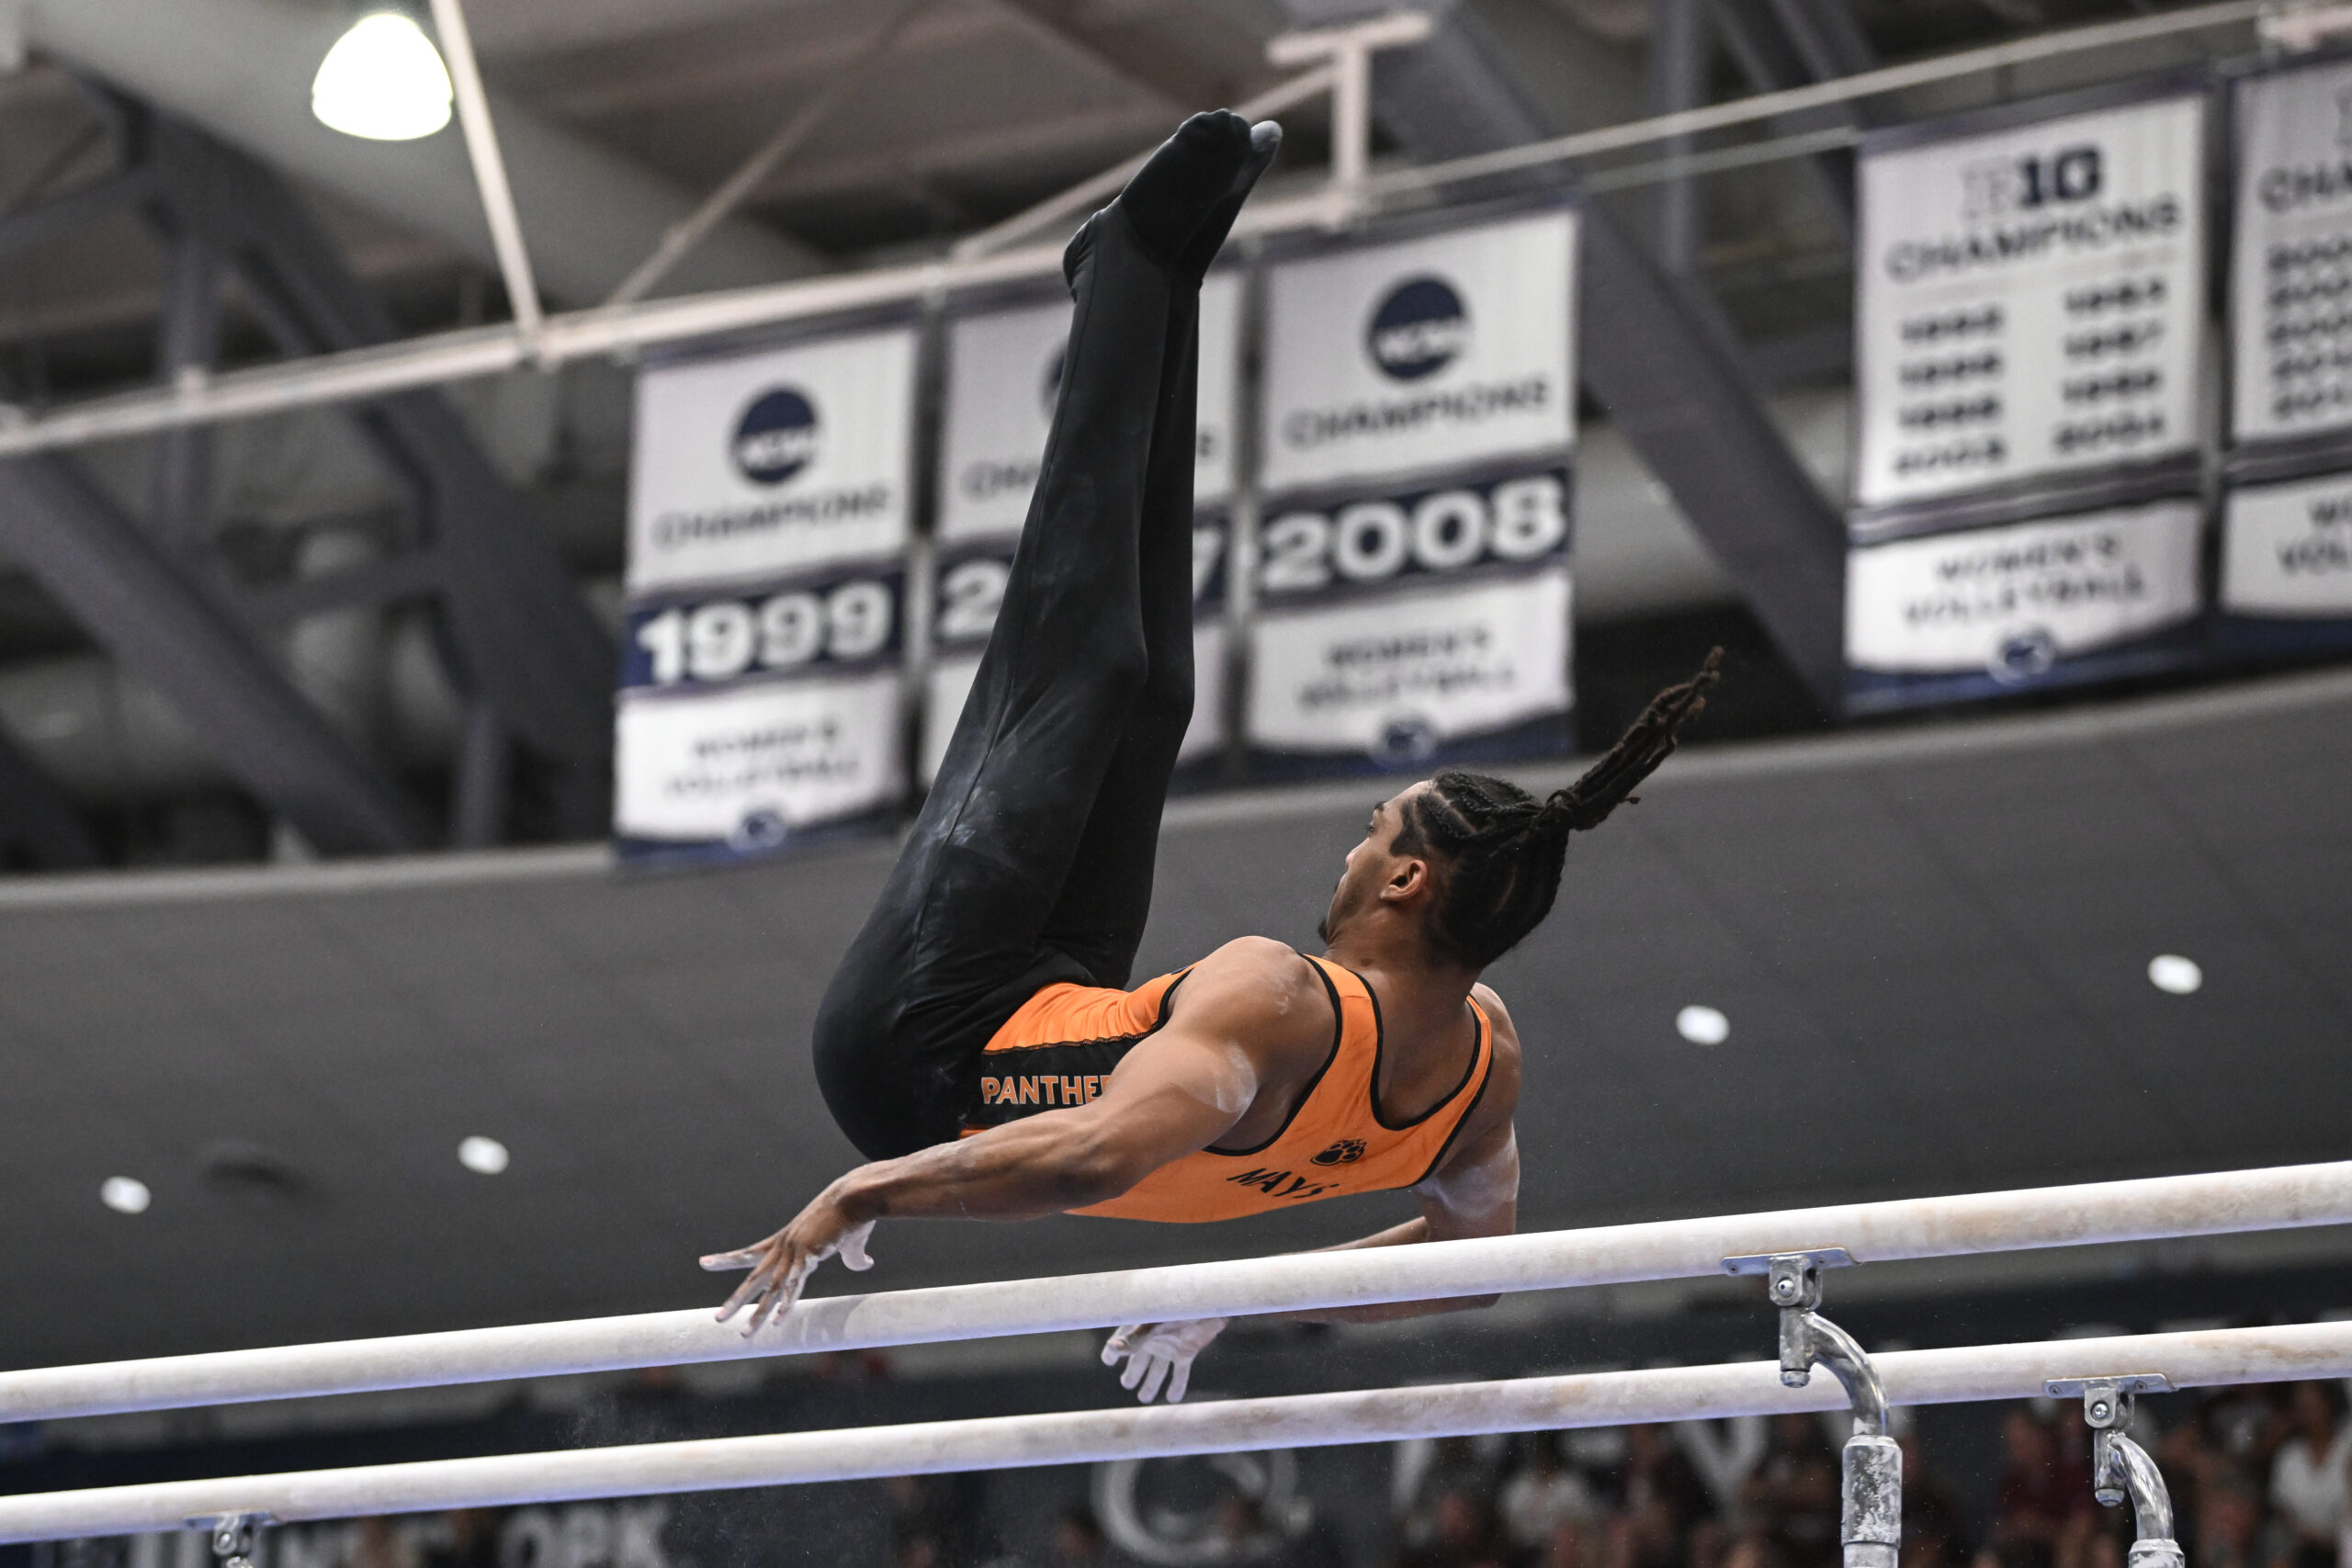 Greenville's Ricky Mays on parallel bars at the 2023 NCAA Men's Gymnastics Championships.